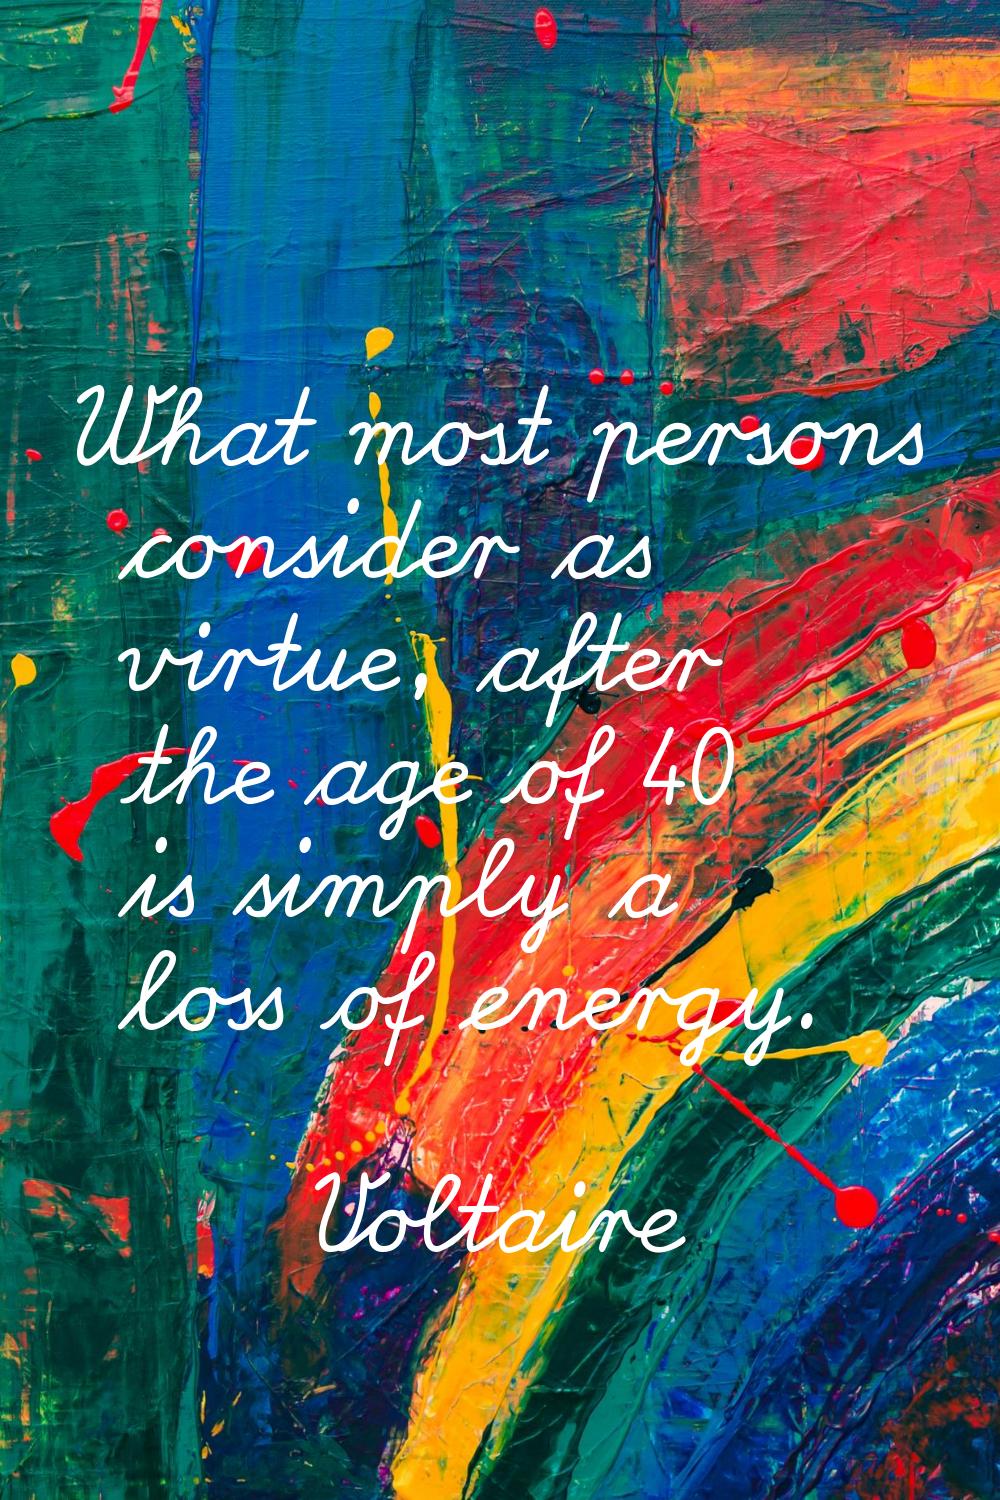 What most persons consider as virtue, after the age of 40 is simply a loss of energy.